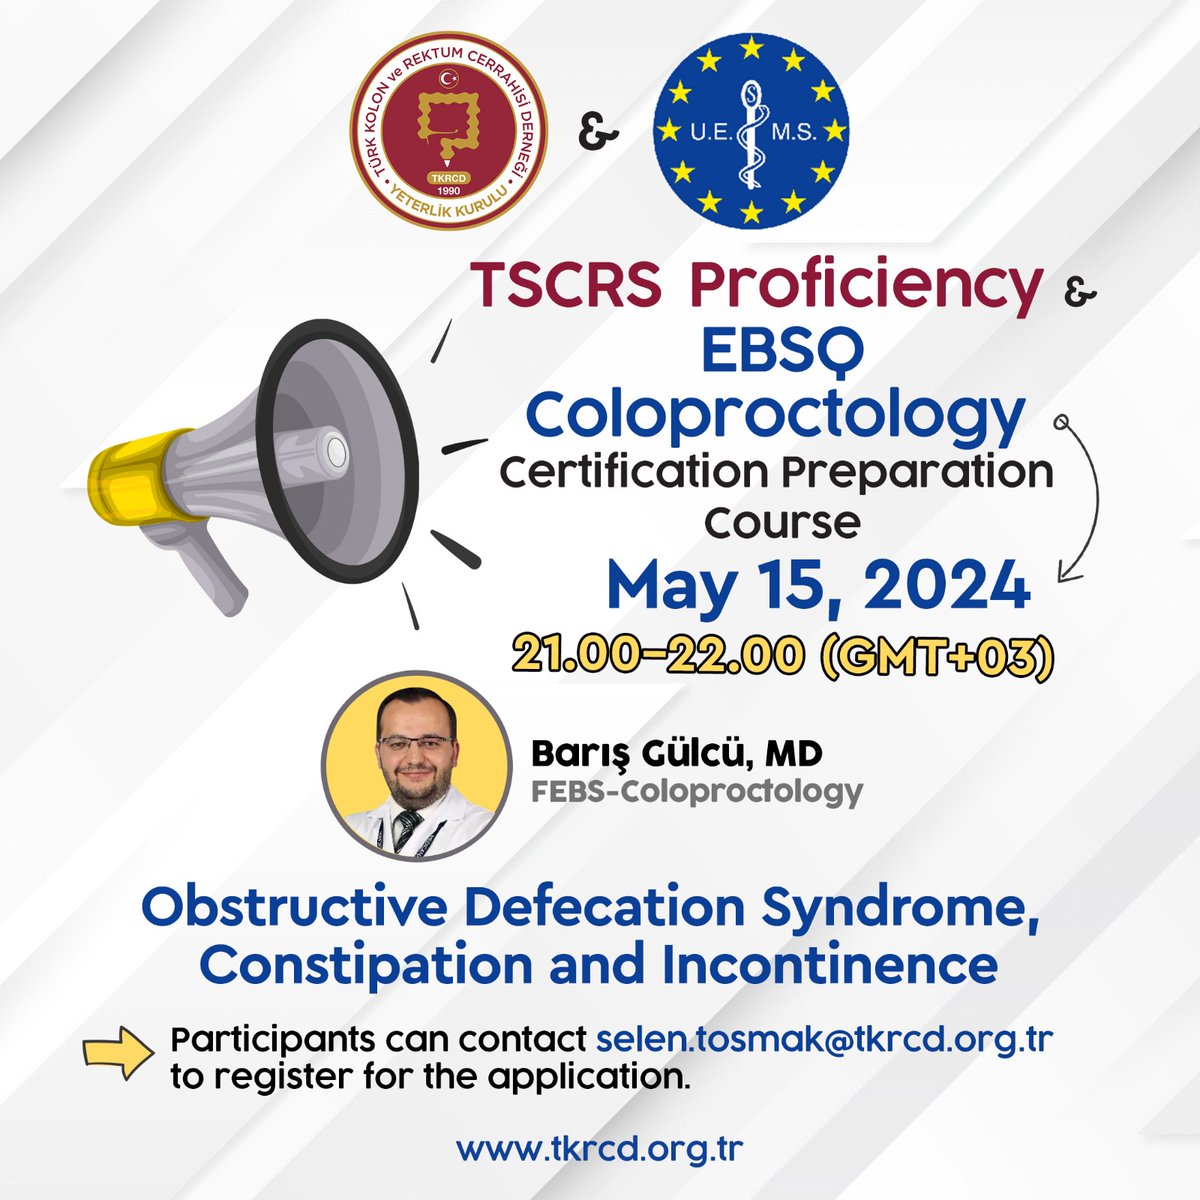 🎓 You're Invited to the TSCRS Board Exam and EBSQ Coloproctology Certification Preparation Course! 🗓️ **Wednesday, May 15, 2024** ⏰ **21:00 - 22:00 (GMT+3)** 👨‍⚕️ Presented by **Dr. Barış Gülcü, MD, FEBS-C** (@drbarisgulcu), this valuable session offers in-depth knowledge on